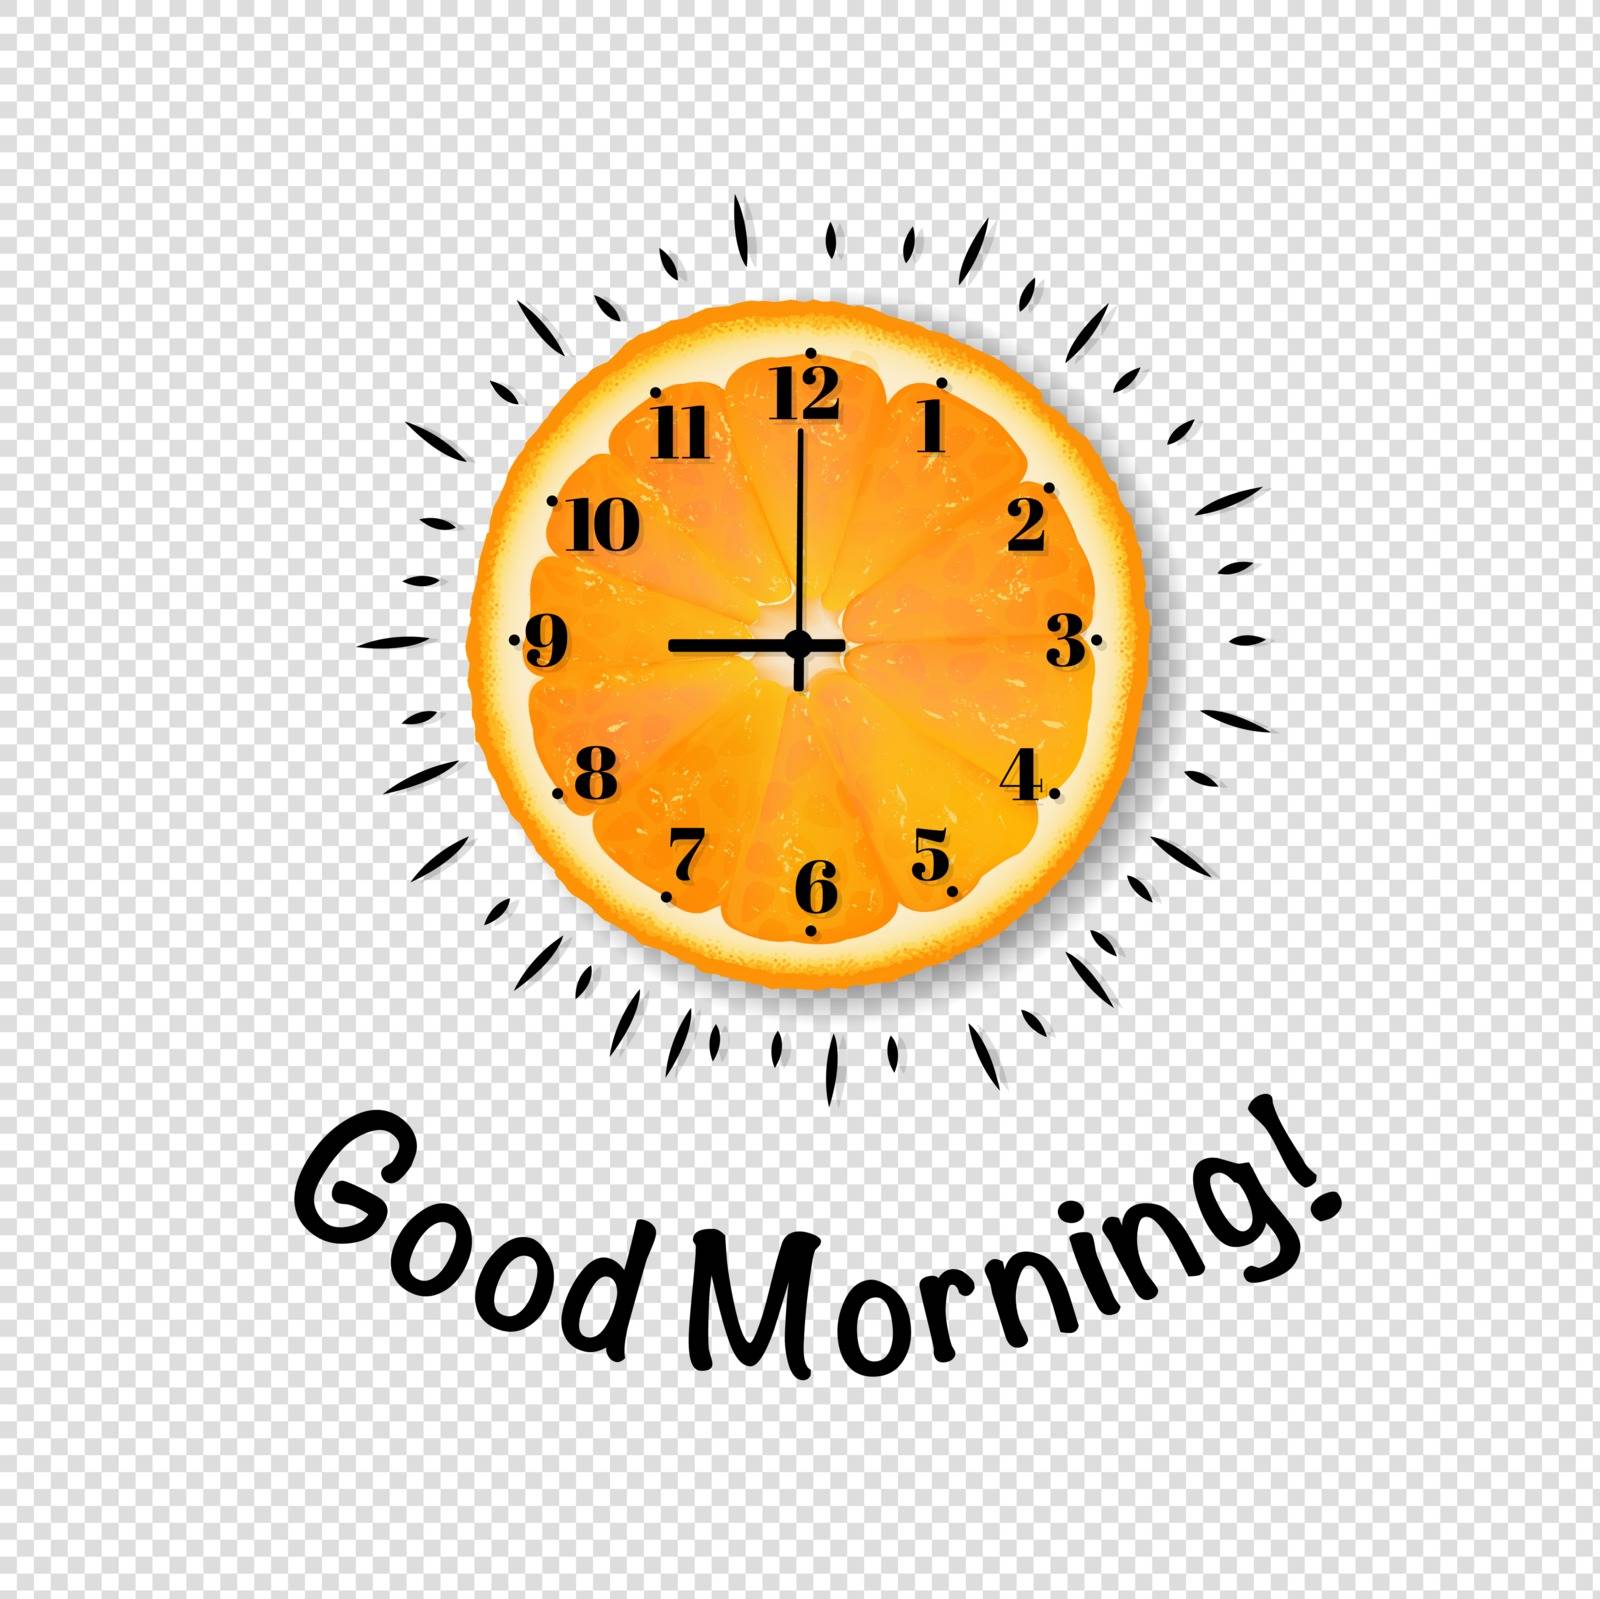 Good Morning Banner With Orange Transparent Background With Gradient Mesh, Vector Illustration